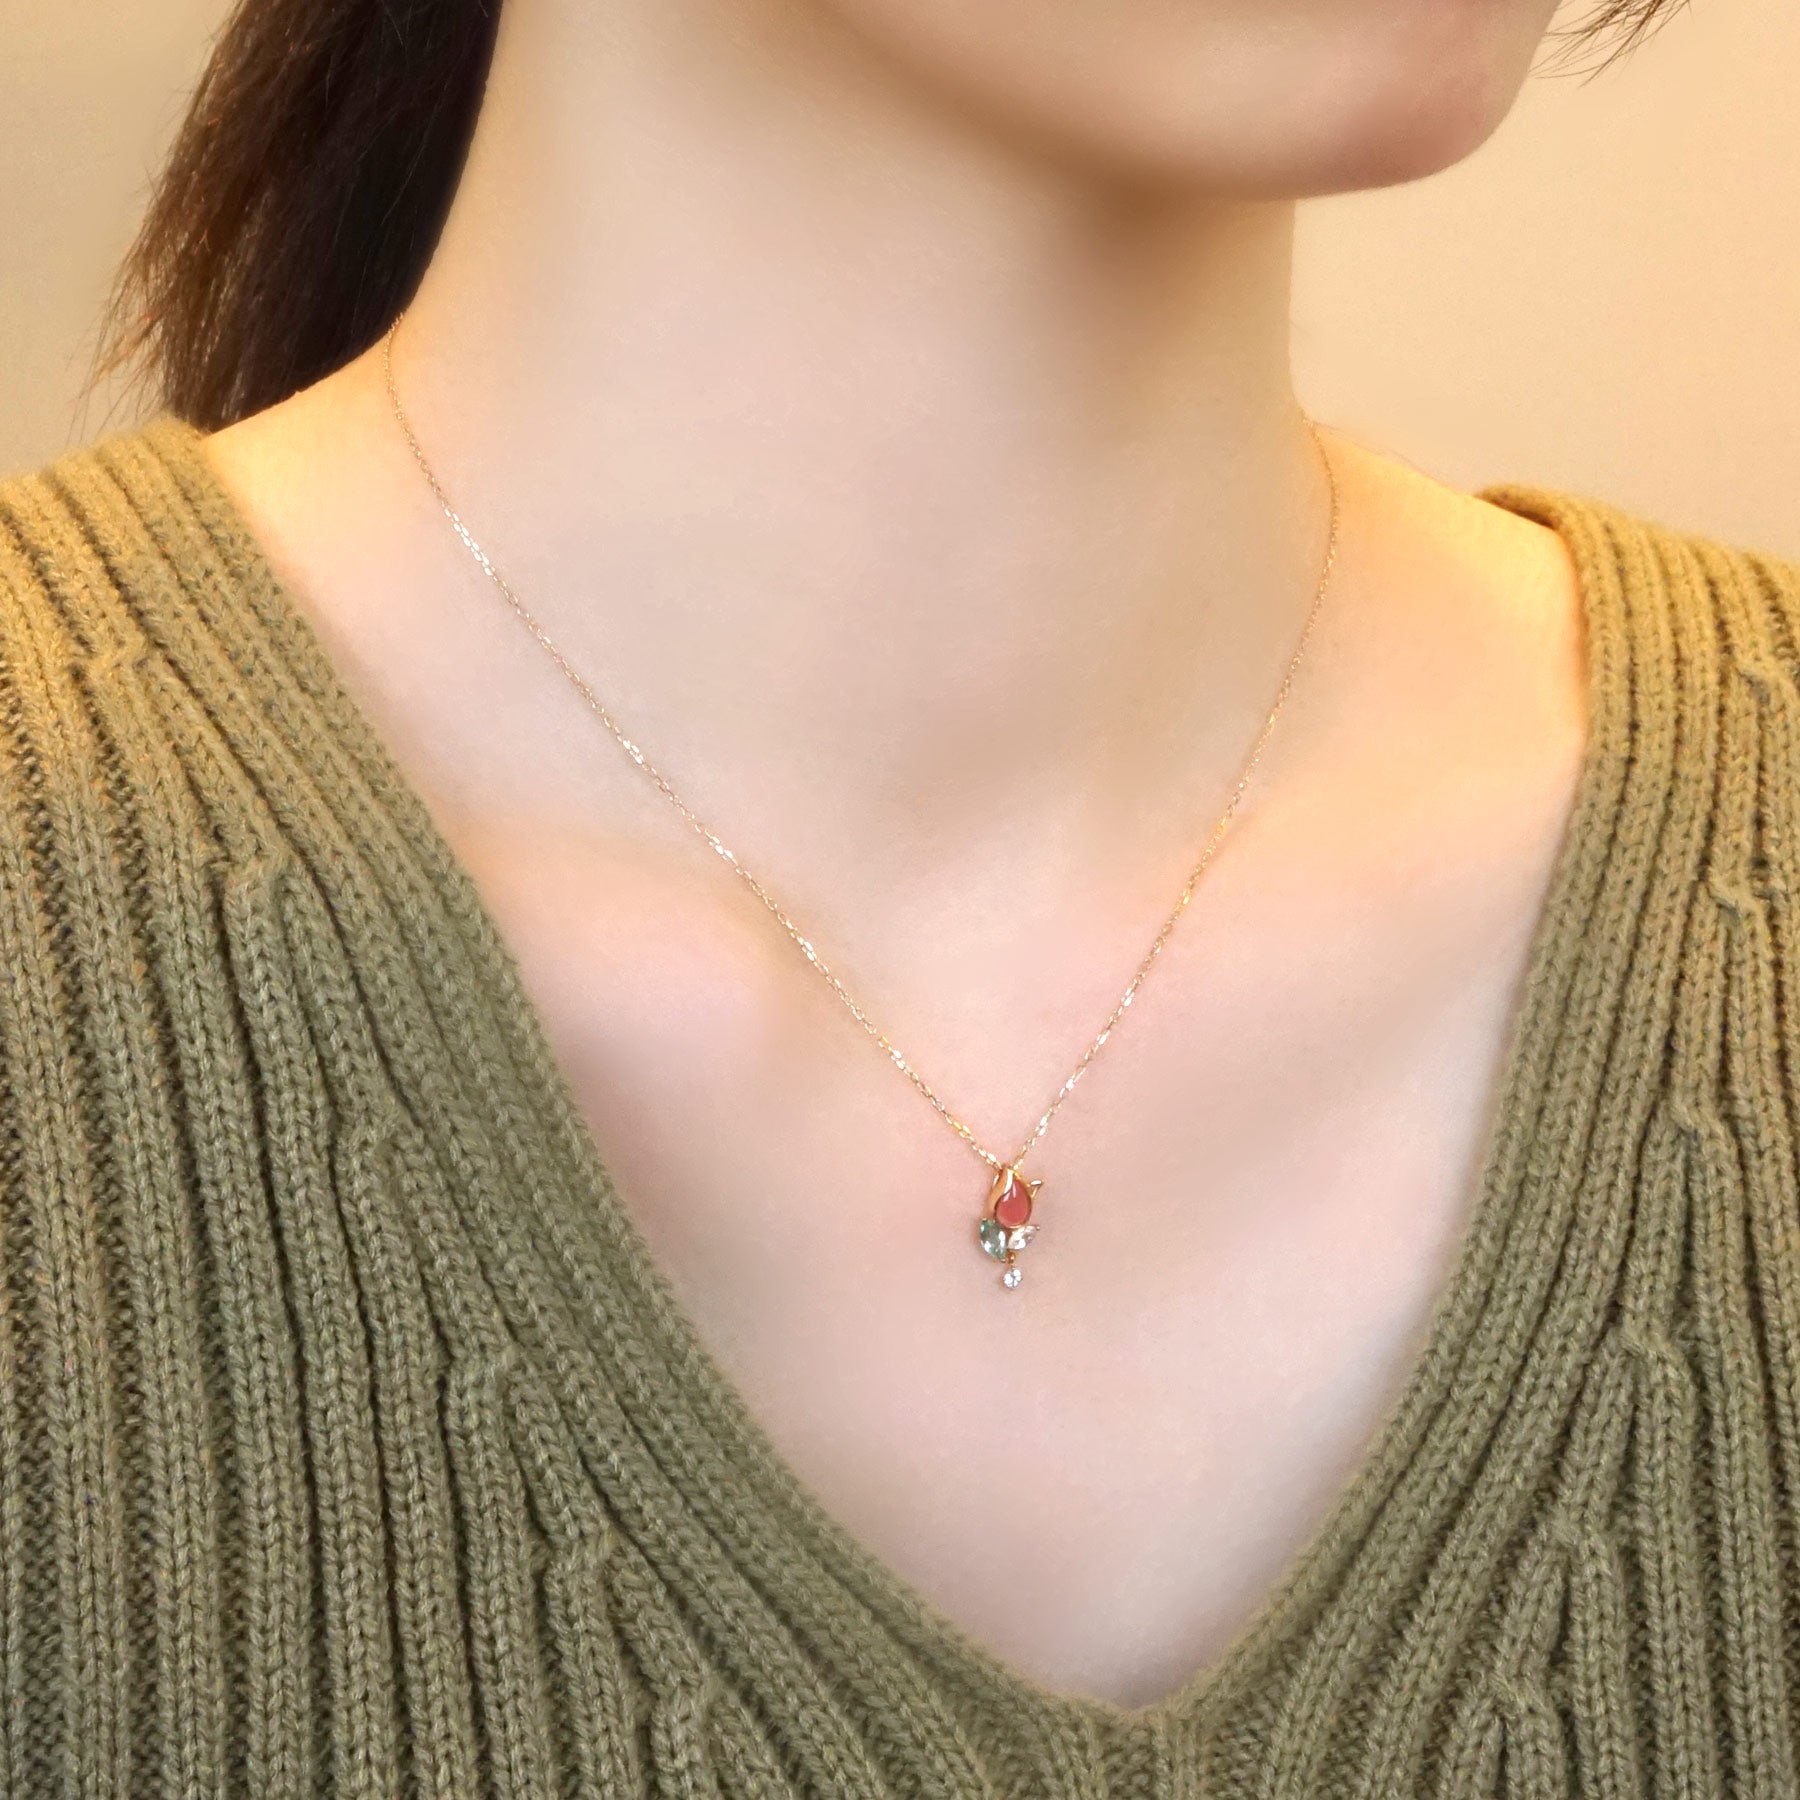 [Birth Flower Jewelry] March Tulip Necklace (Rose Gold) - Model Image